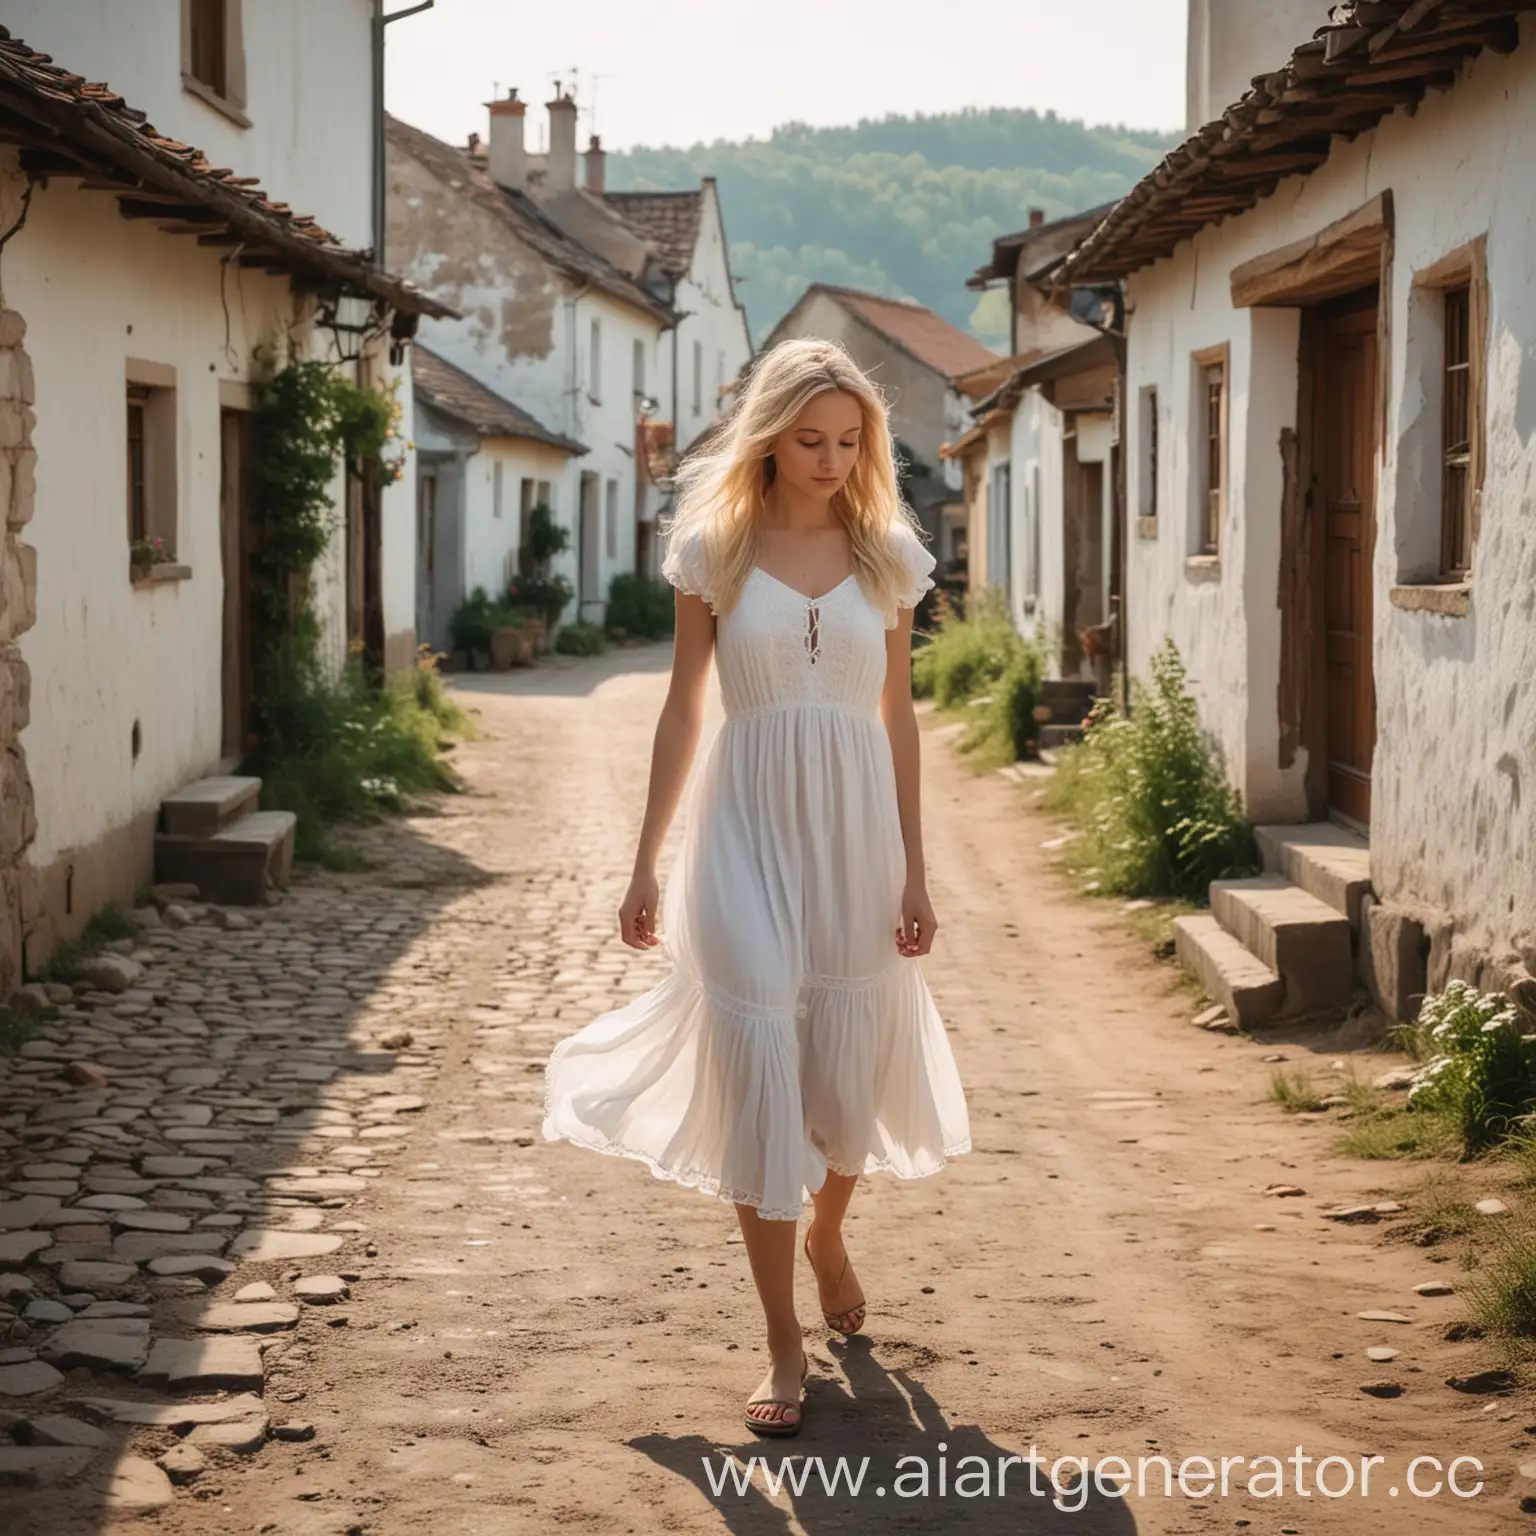 Serene-Young-Woman-in-White-Strolling-Through-Countryside-Village